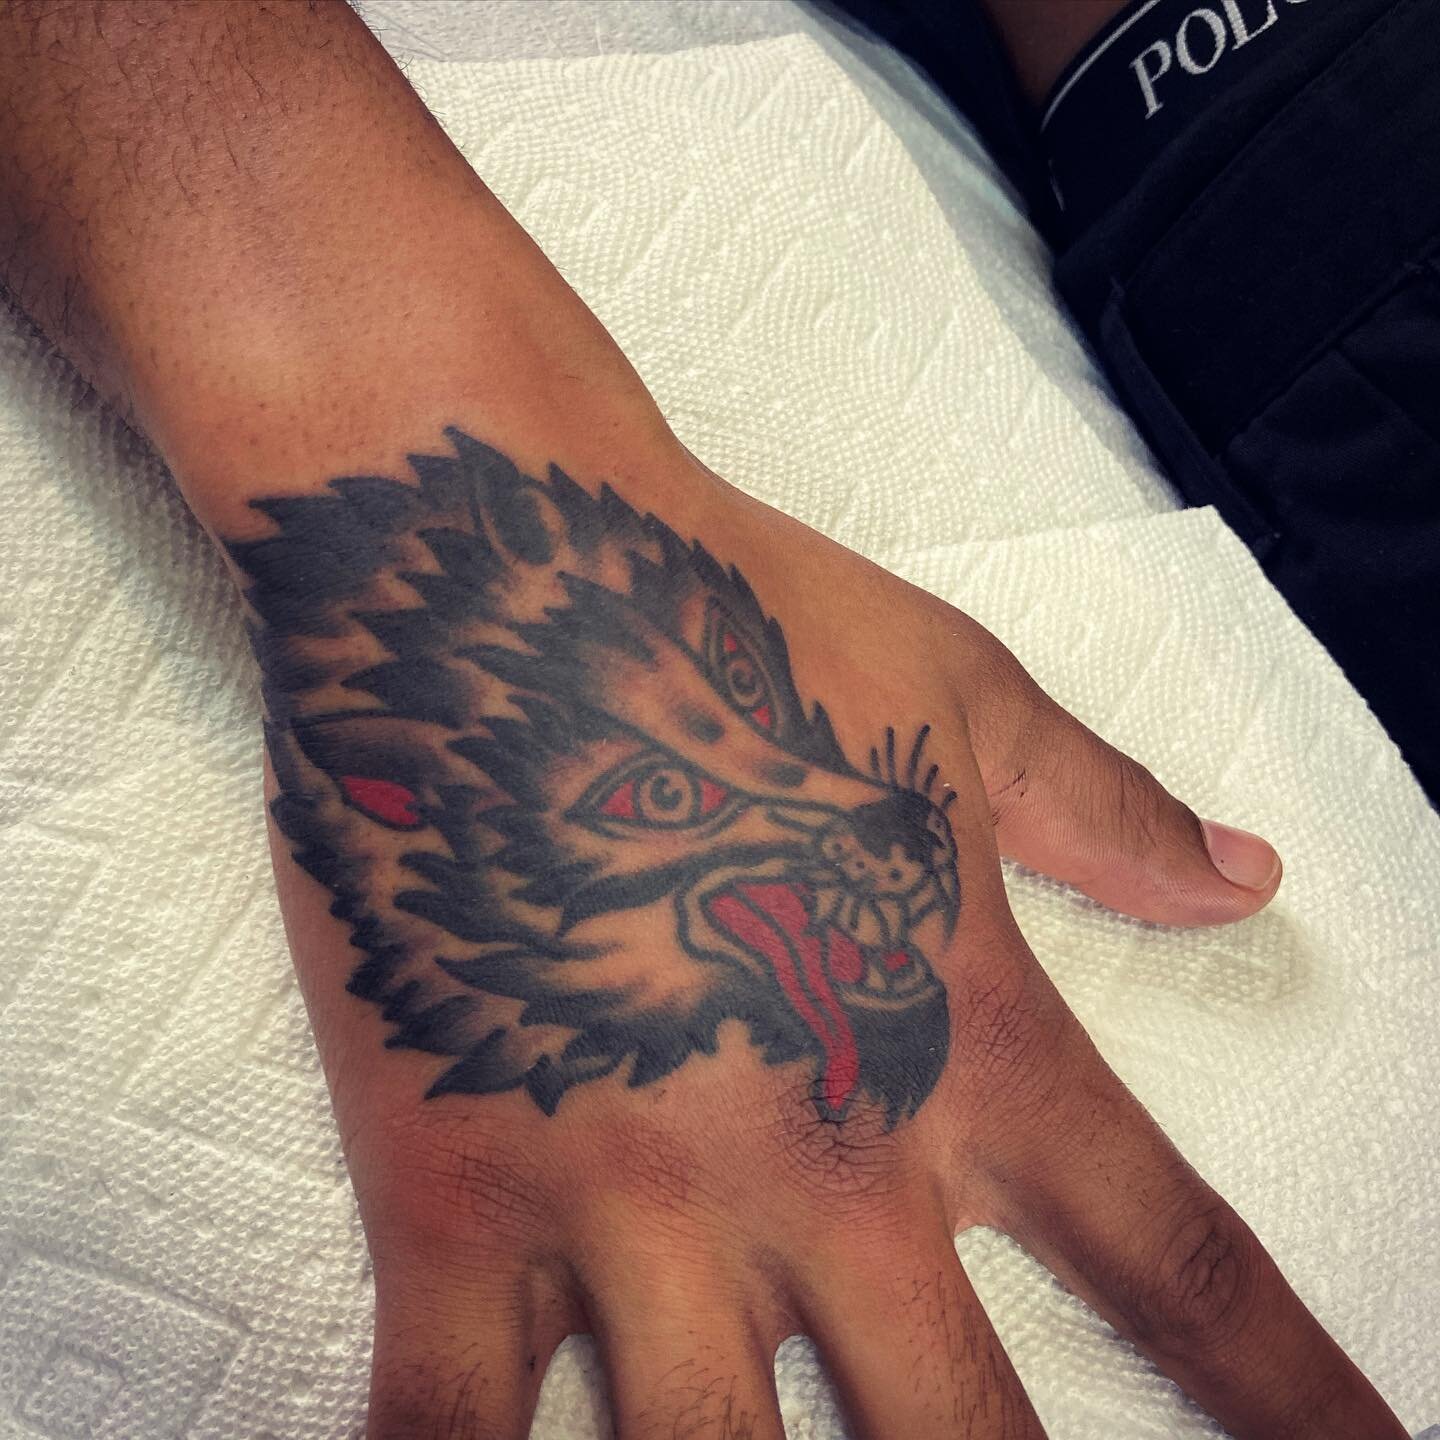 A #wolftattoo from #thegoodbook for Tyrel 
.
.
.
.
.
#acmetattoocville #spitfiretattoocville #cvilletattooartist #handtattoo